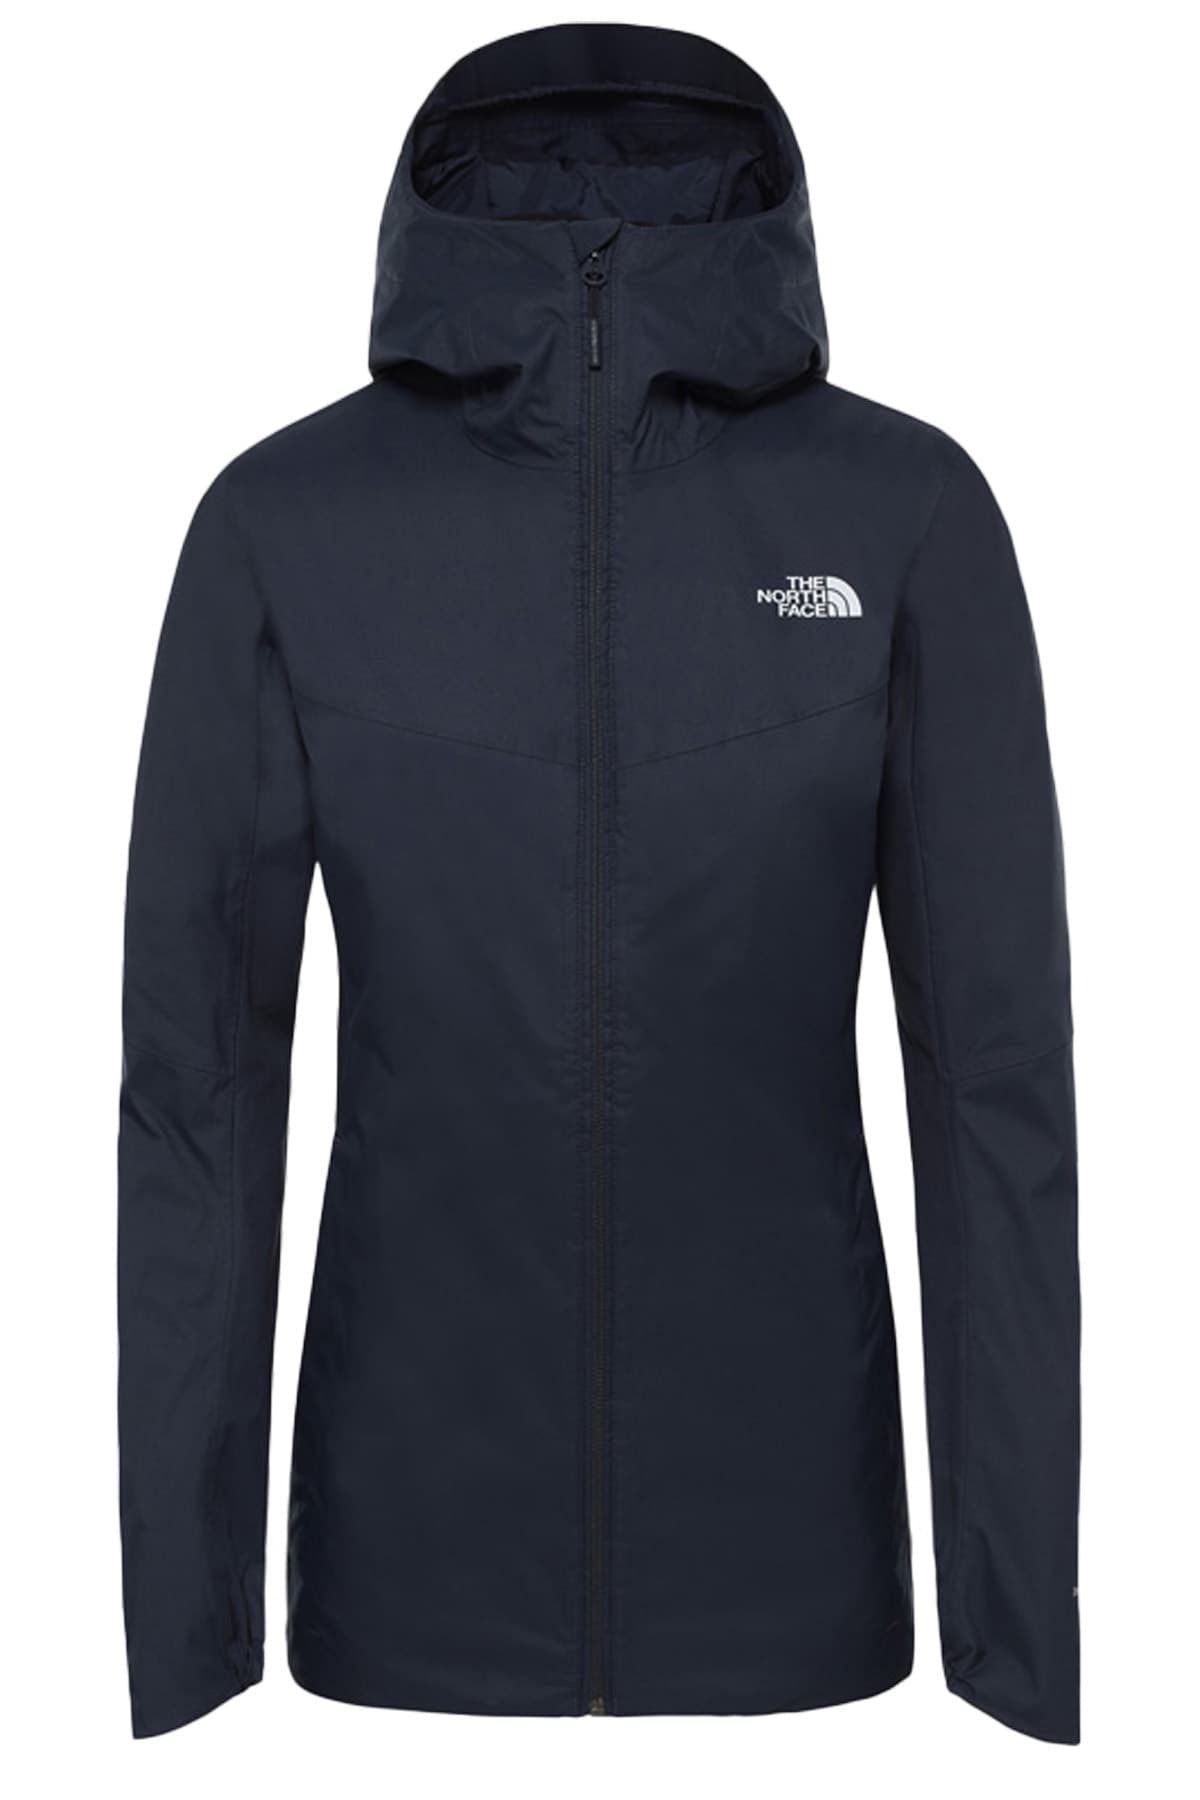 The North Face Quest Ins Kadın Mont - Nf0a3y1j